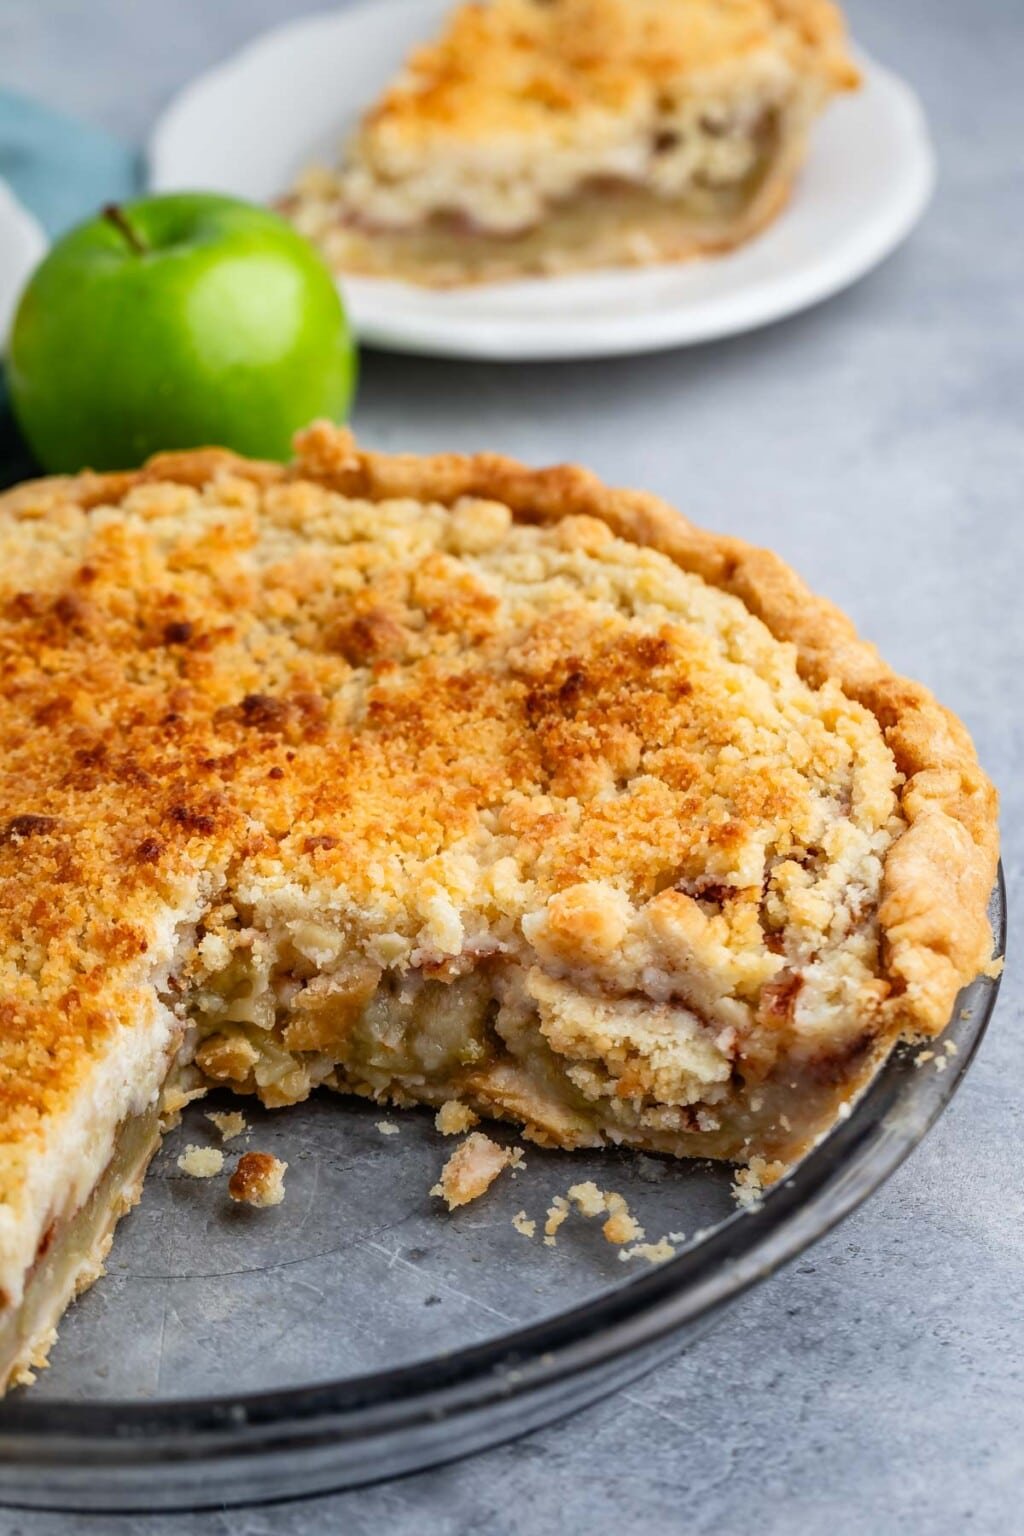 Apple Pie with Crumb Topping Recipe - Crazy for Crust